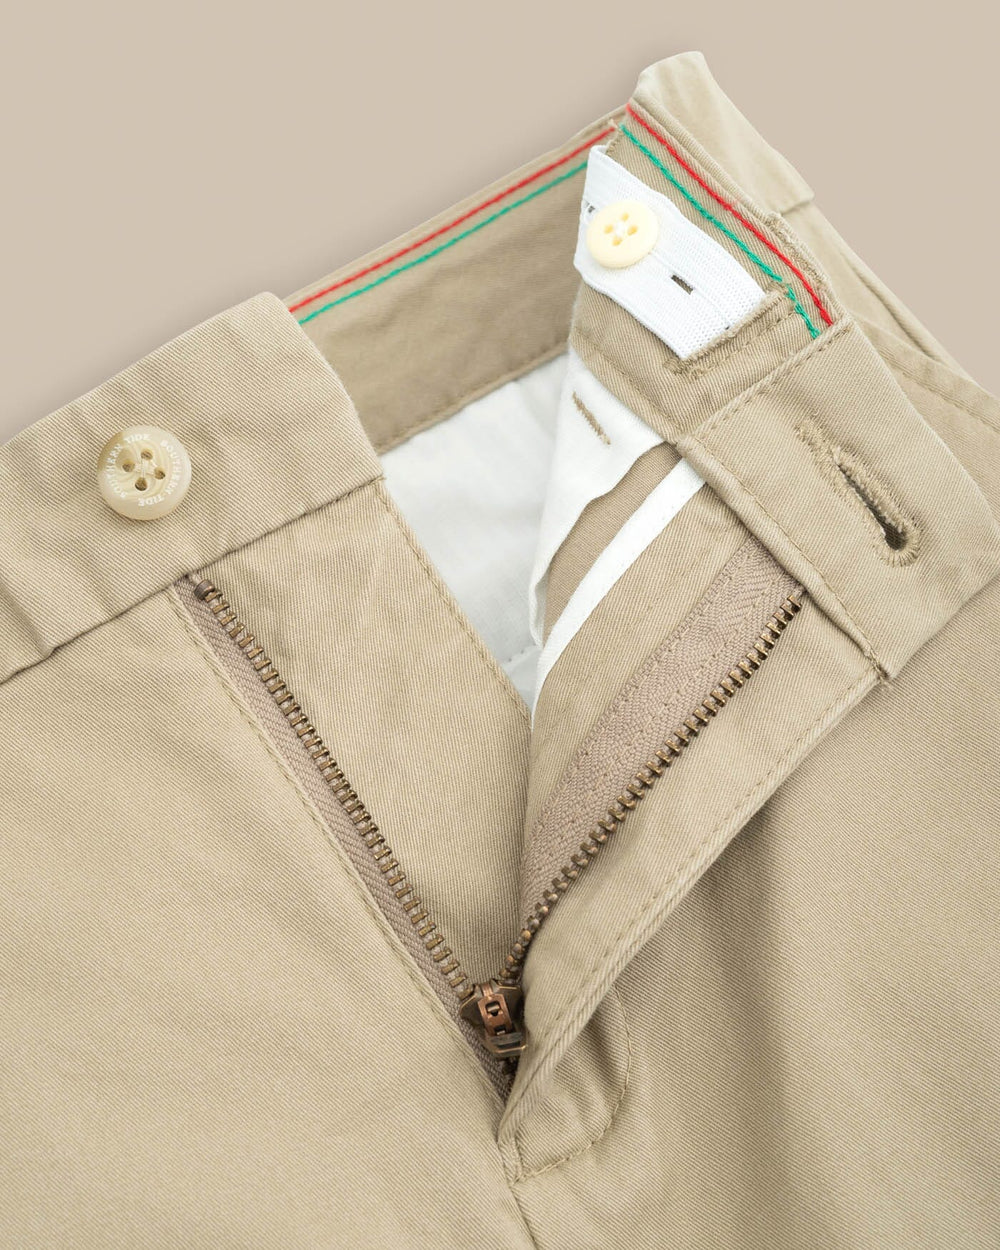 The detail view of the Boys Channel Marker Pant by Southern Tide - Sandstone Khaki